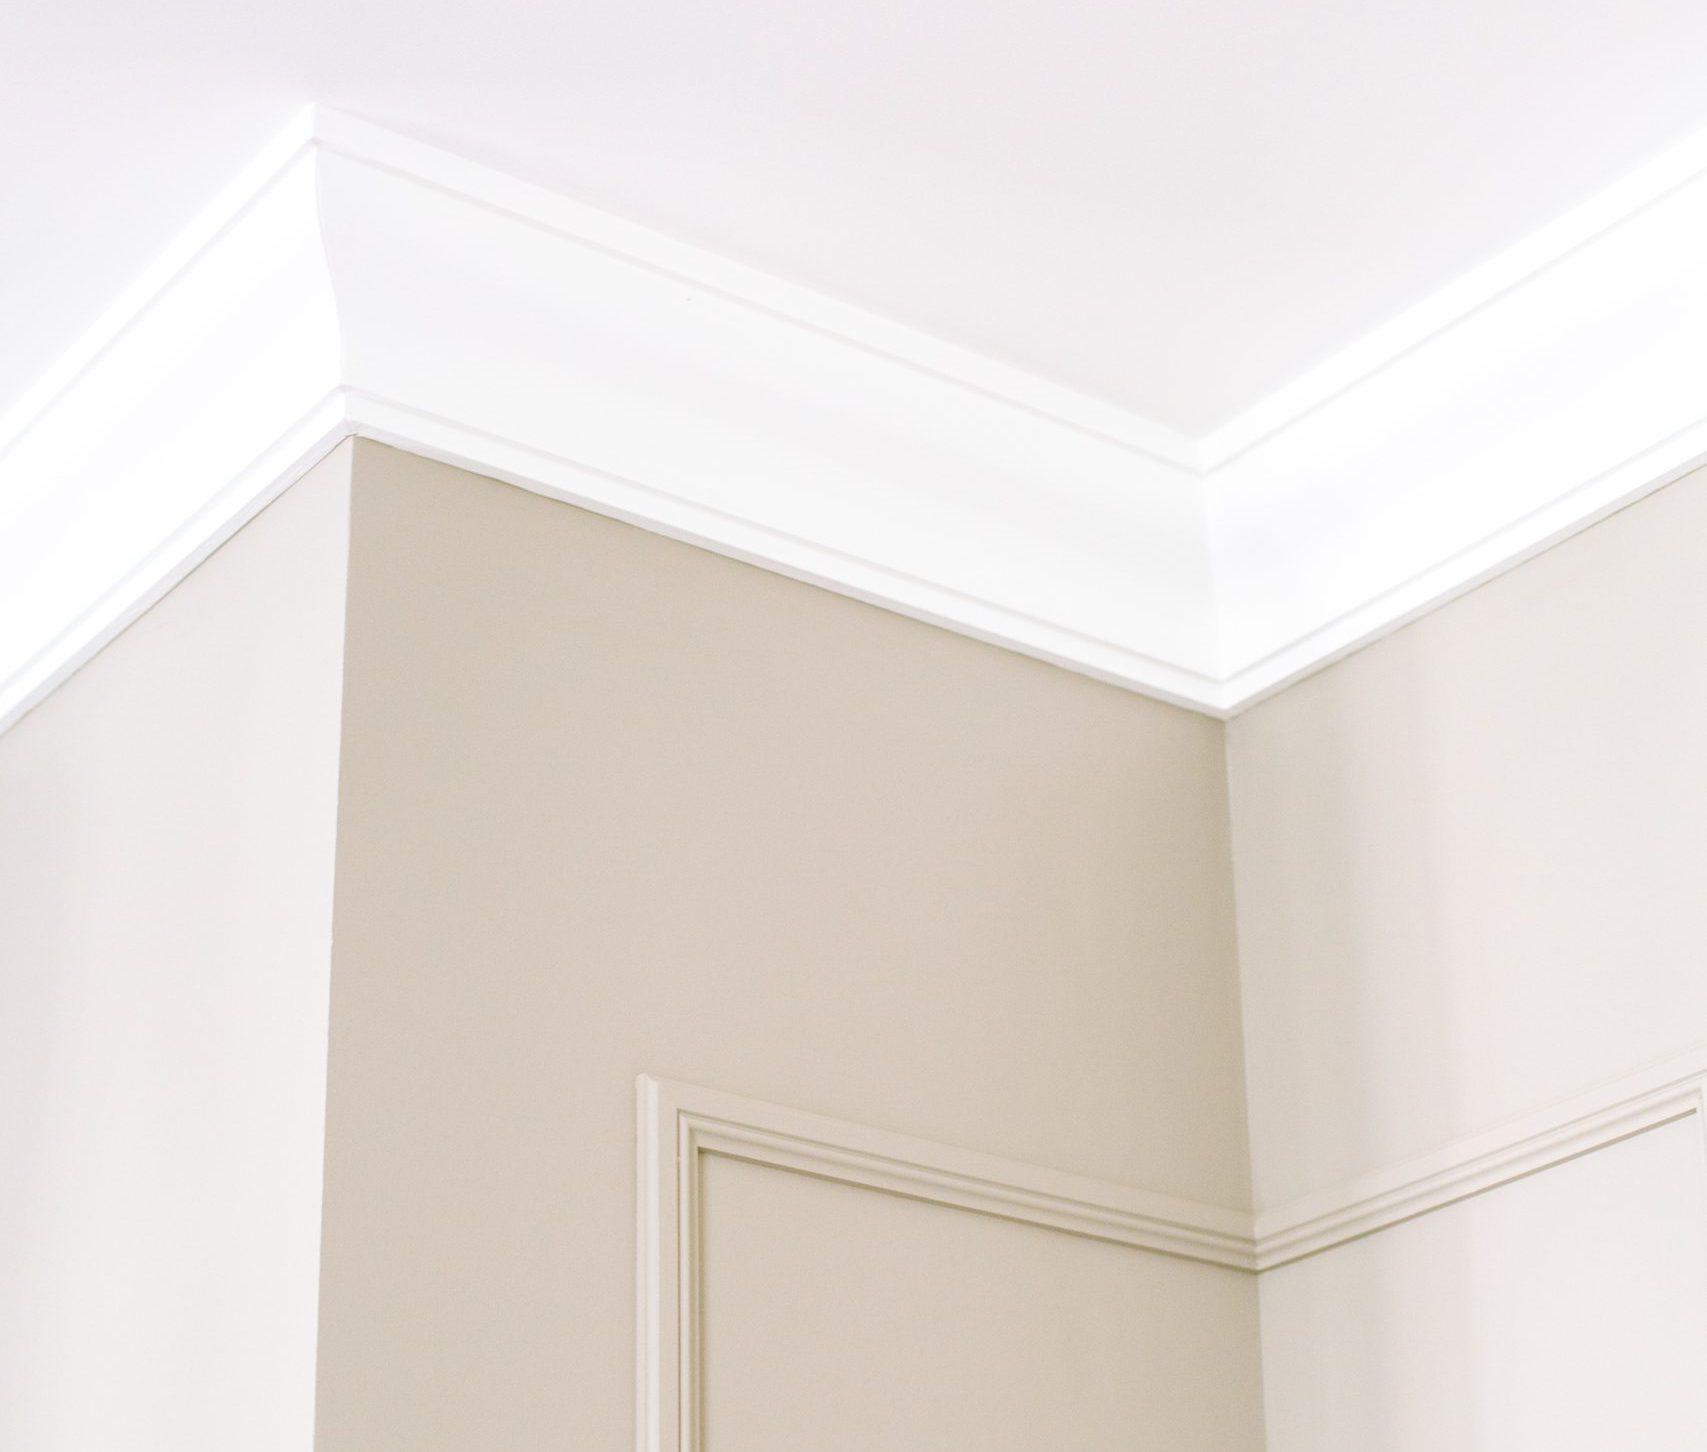 Crown moulding on the corner of a wall and wall moulding below